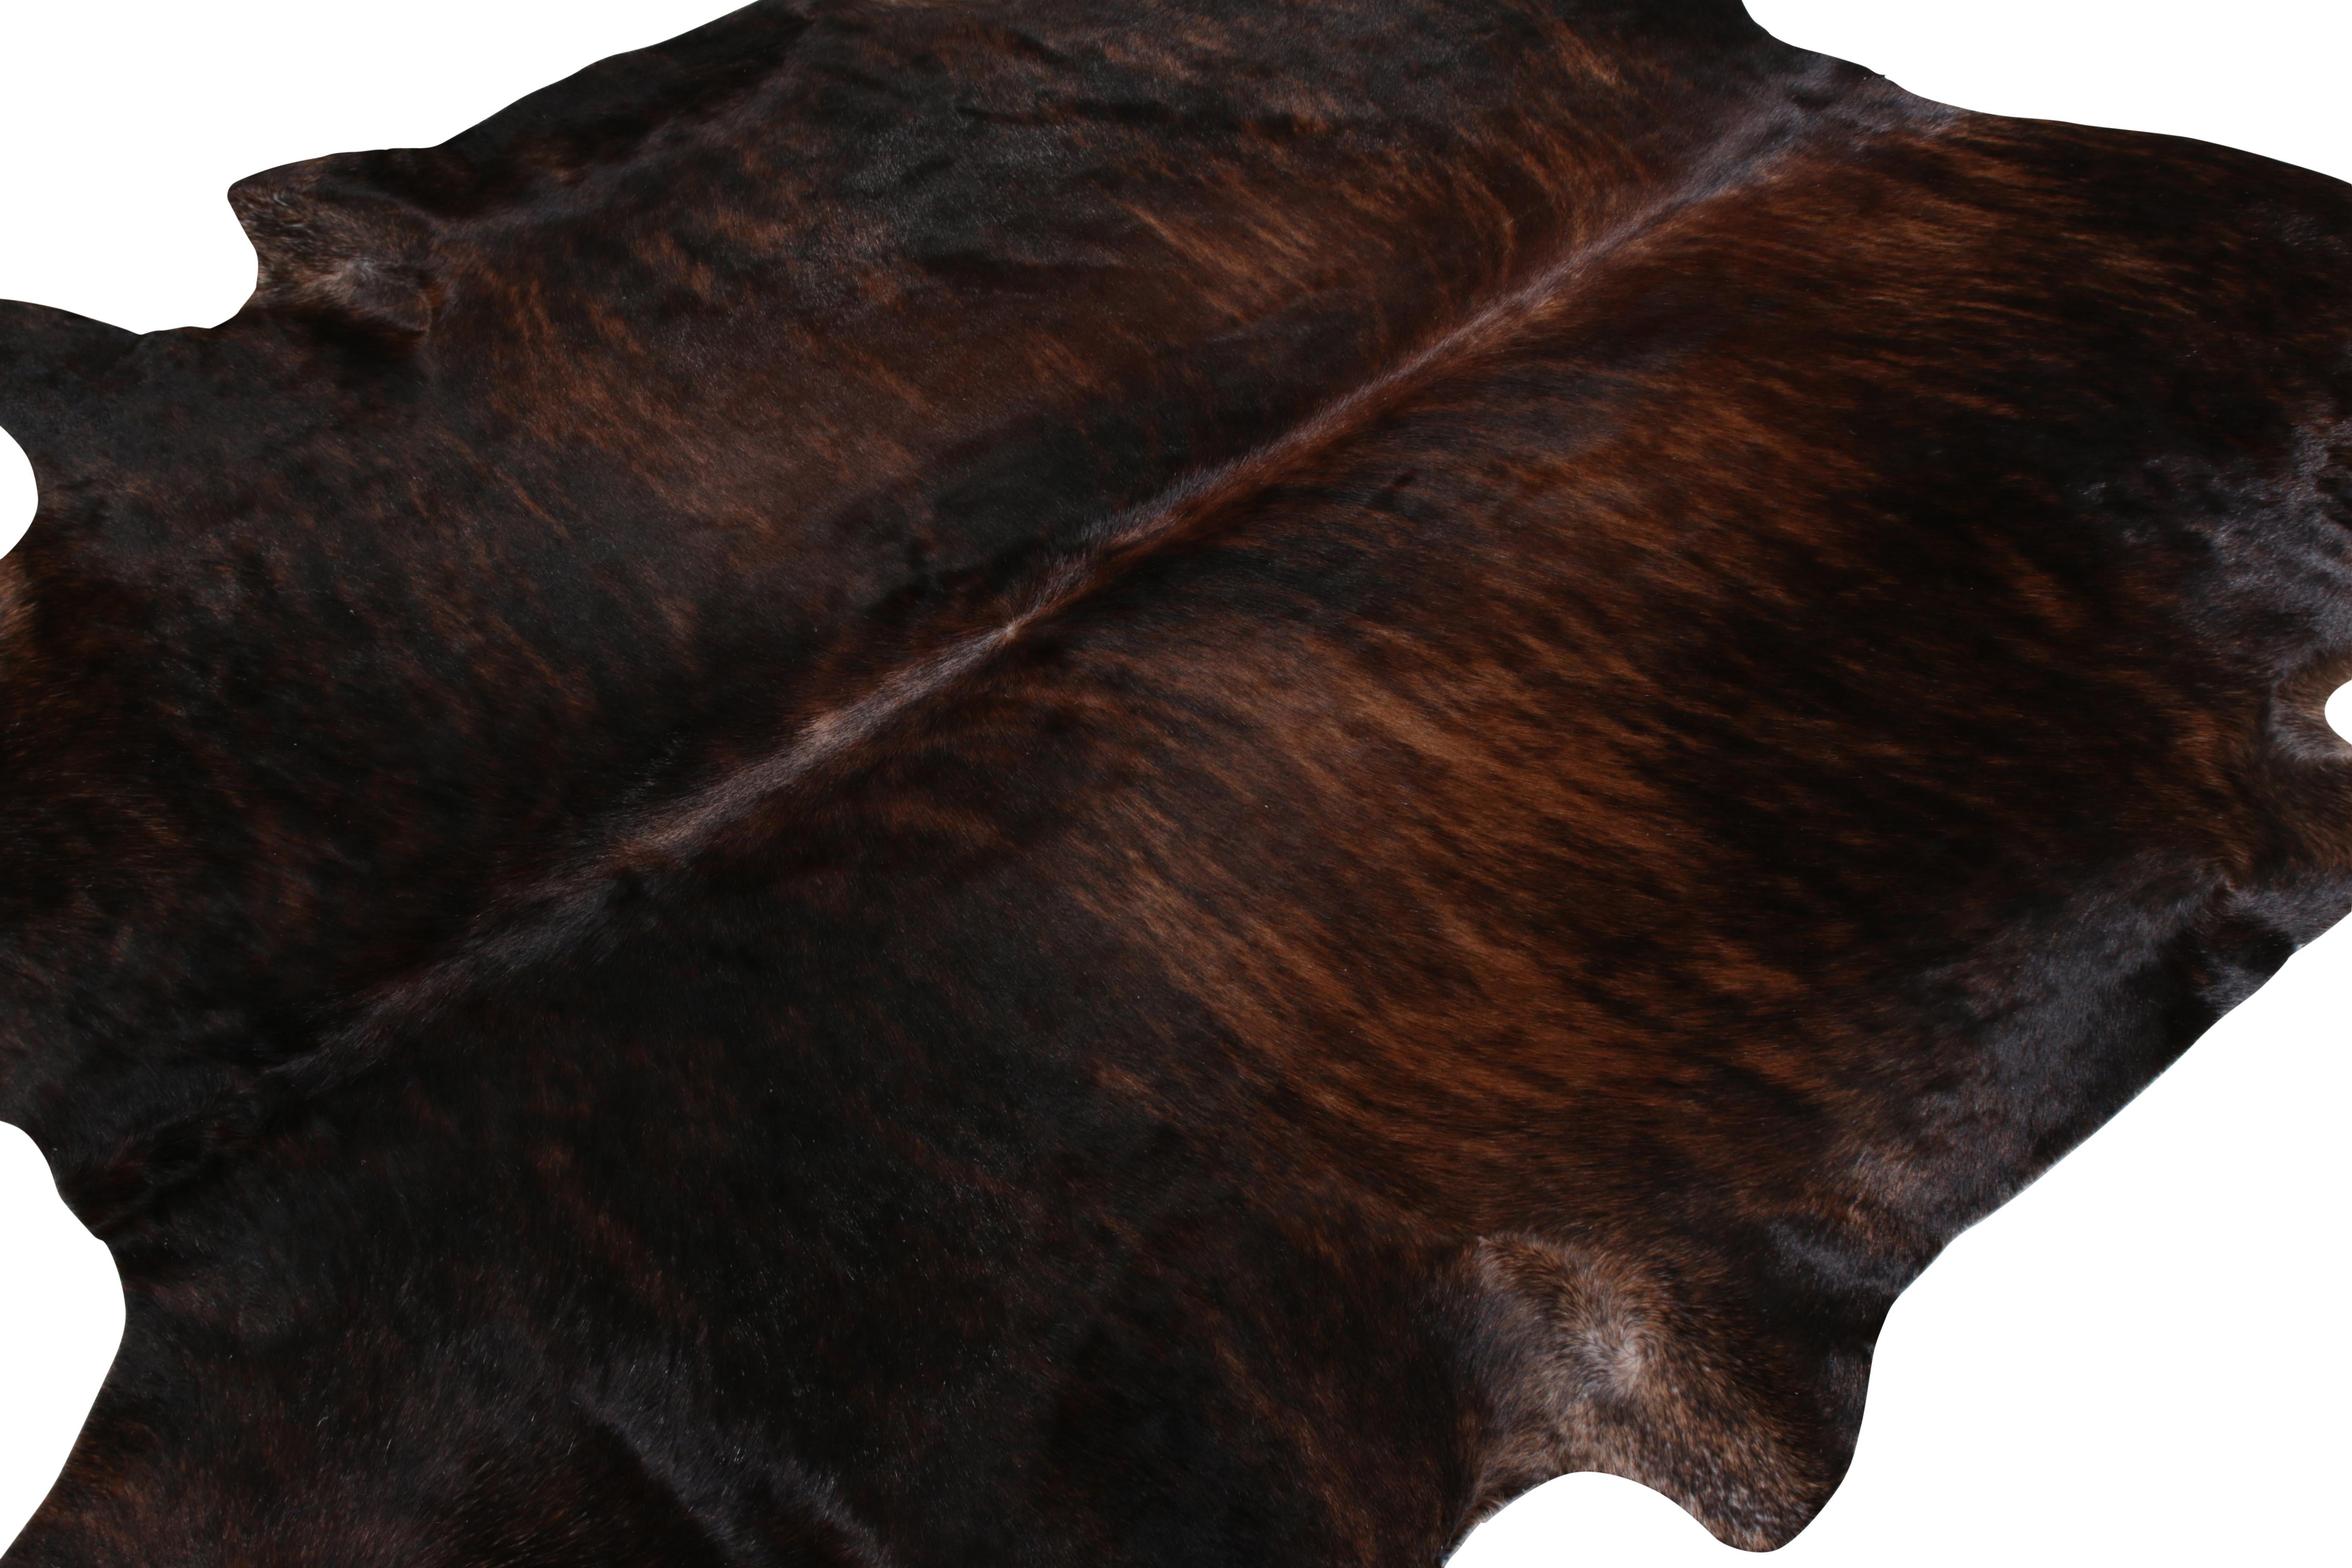 Brazilian Rug & Kilim’s Contemporary Cowhide Rug in Beige-Brown and Black